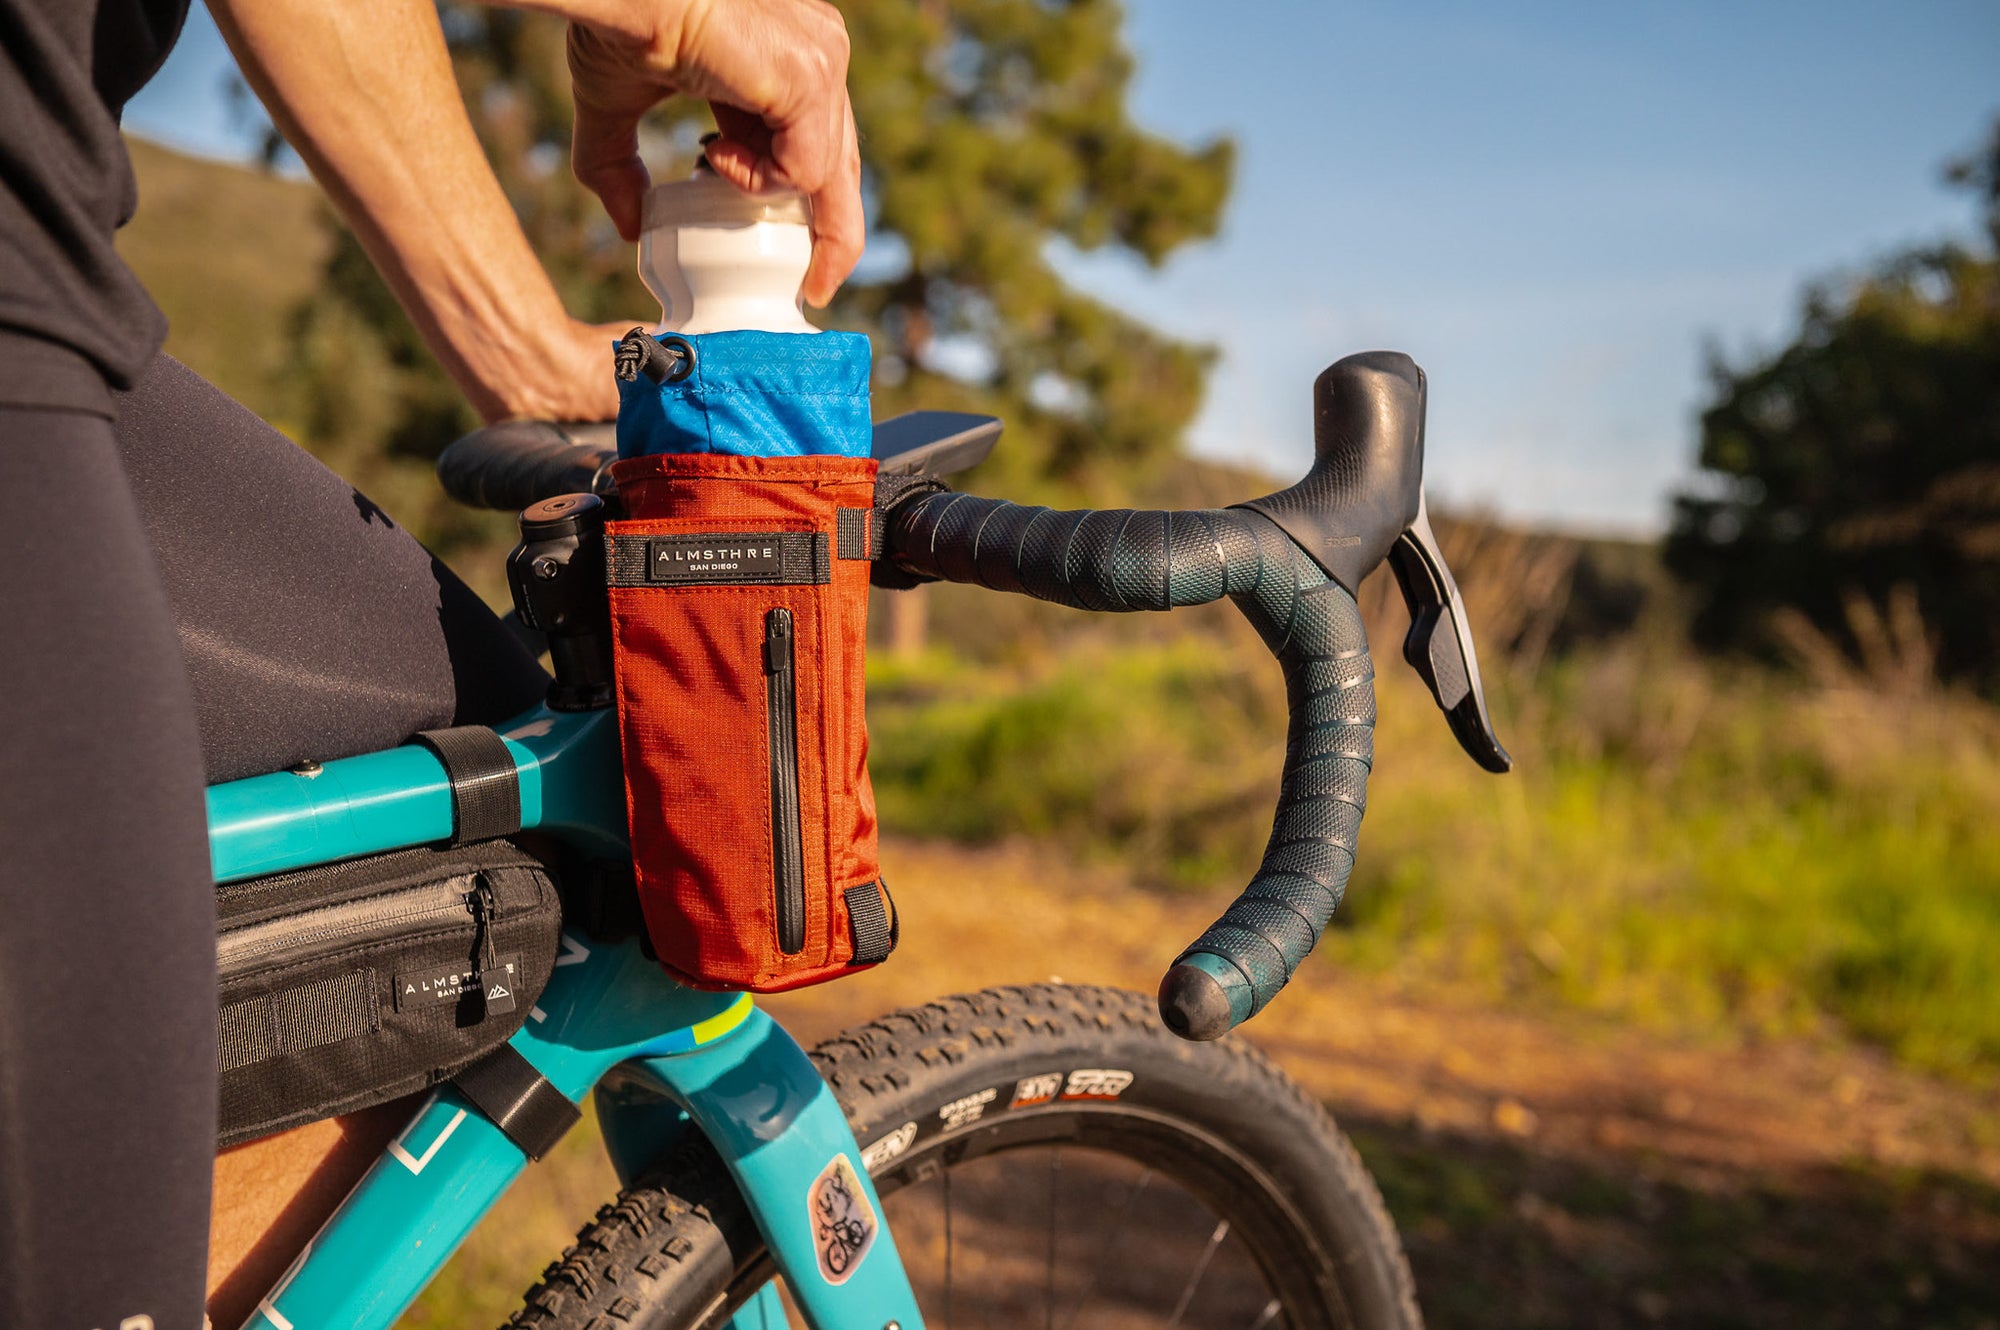 NEW PRODUCT LAUNCH: INTRODUCING THE ALMSTHRE STEM BAG